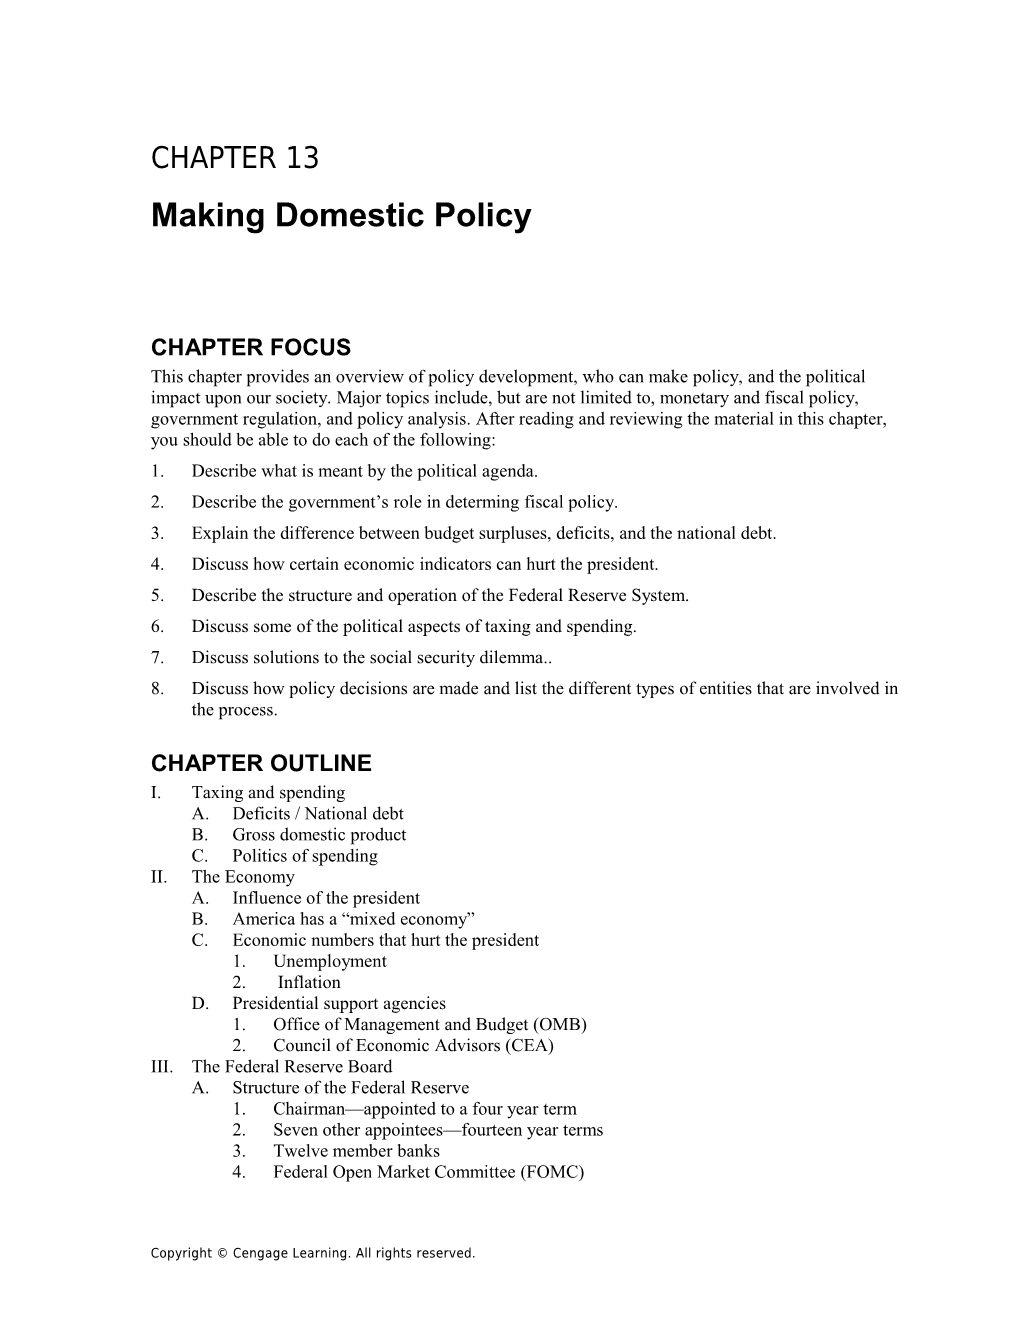 Chapter 13: Making Domestic Policy 1